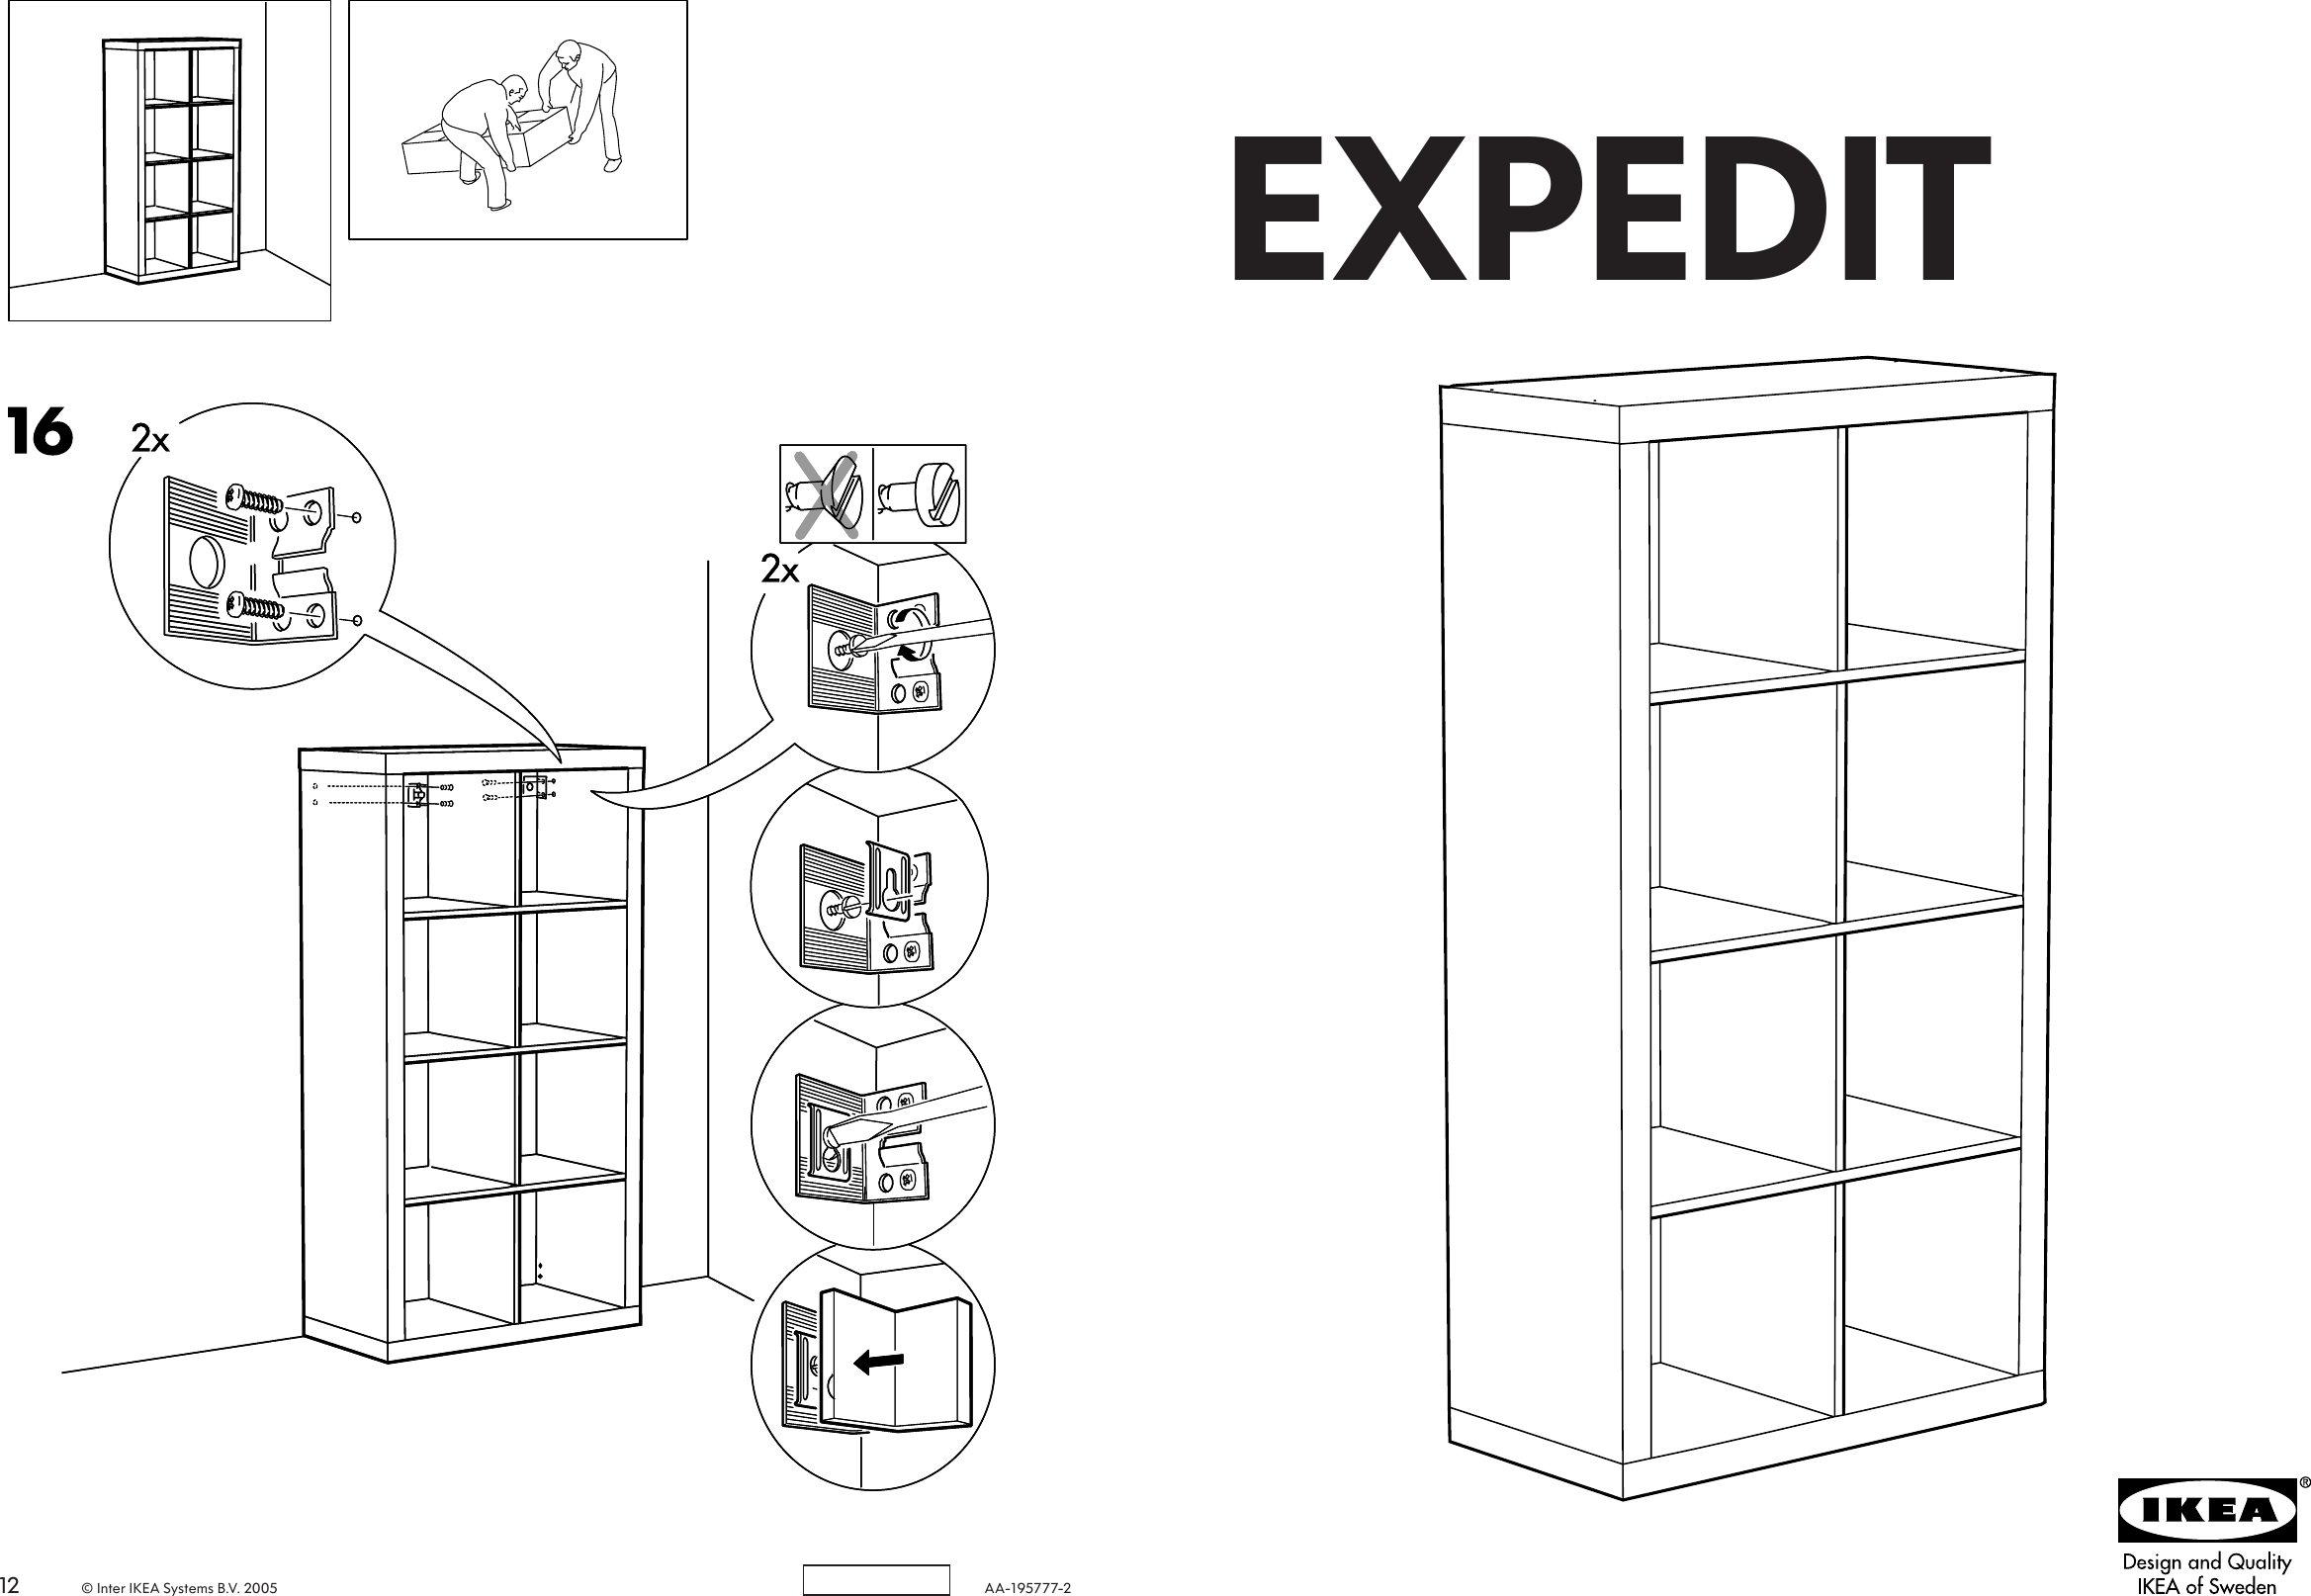 IkeaExpeditBookcase5858X3118AssemblyInstruction.1109971055 User Guide Page 1 